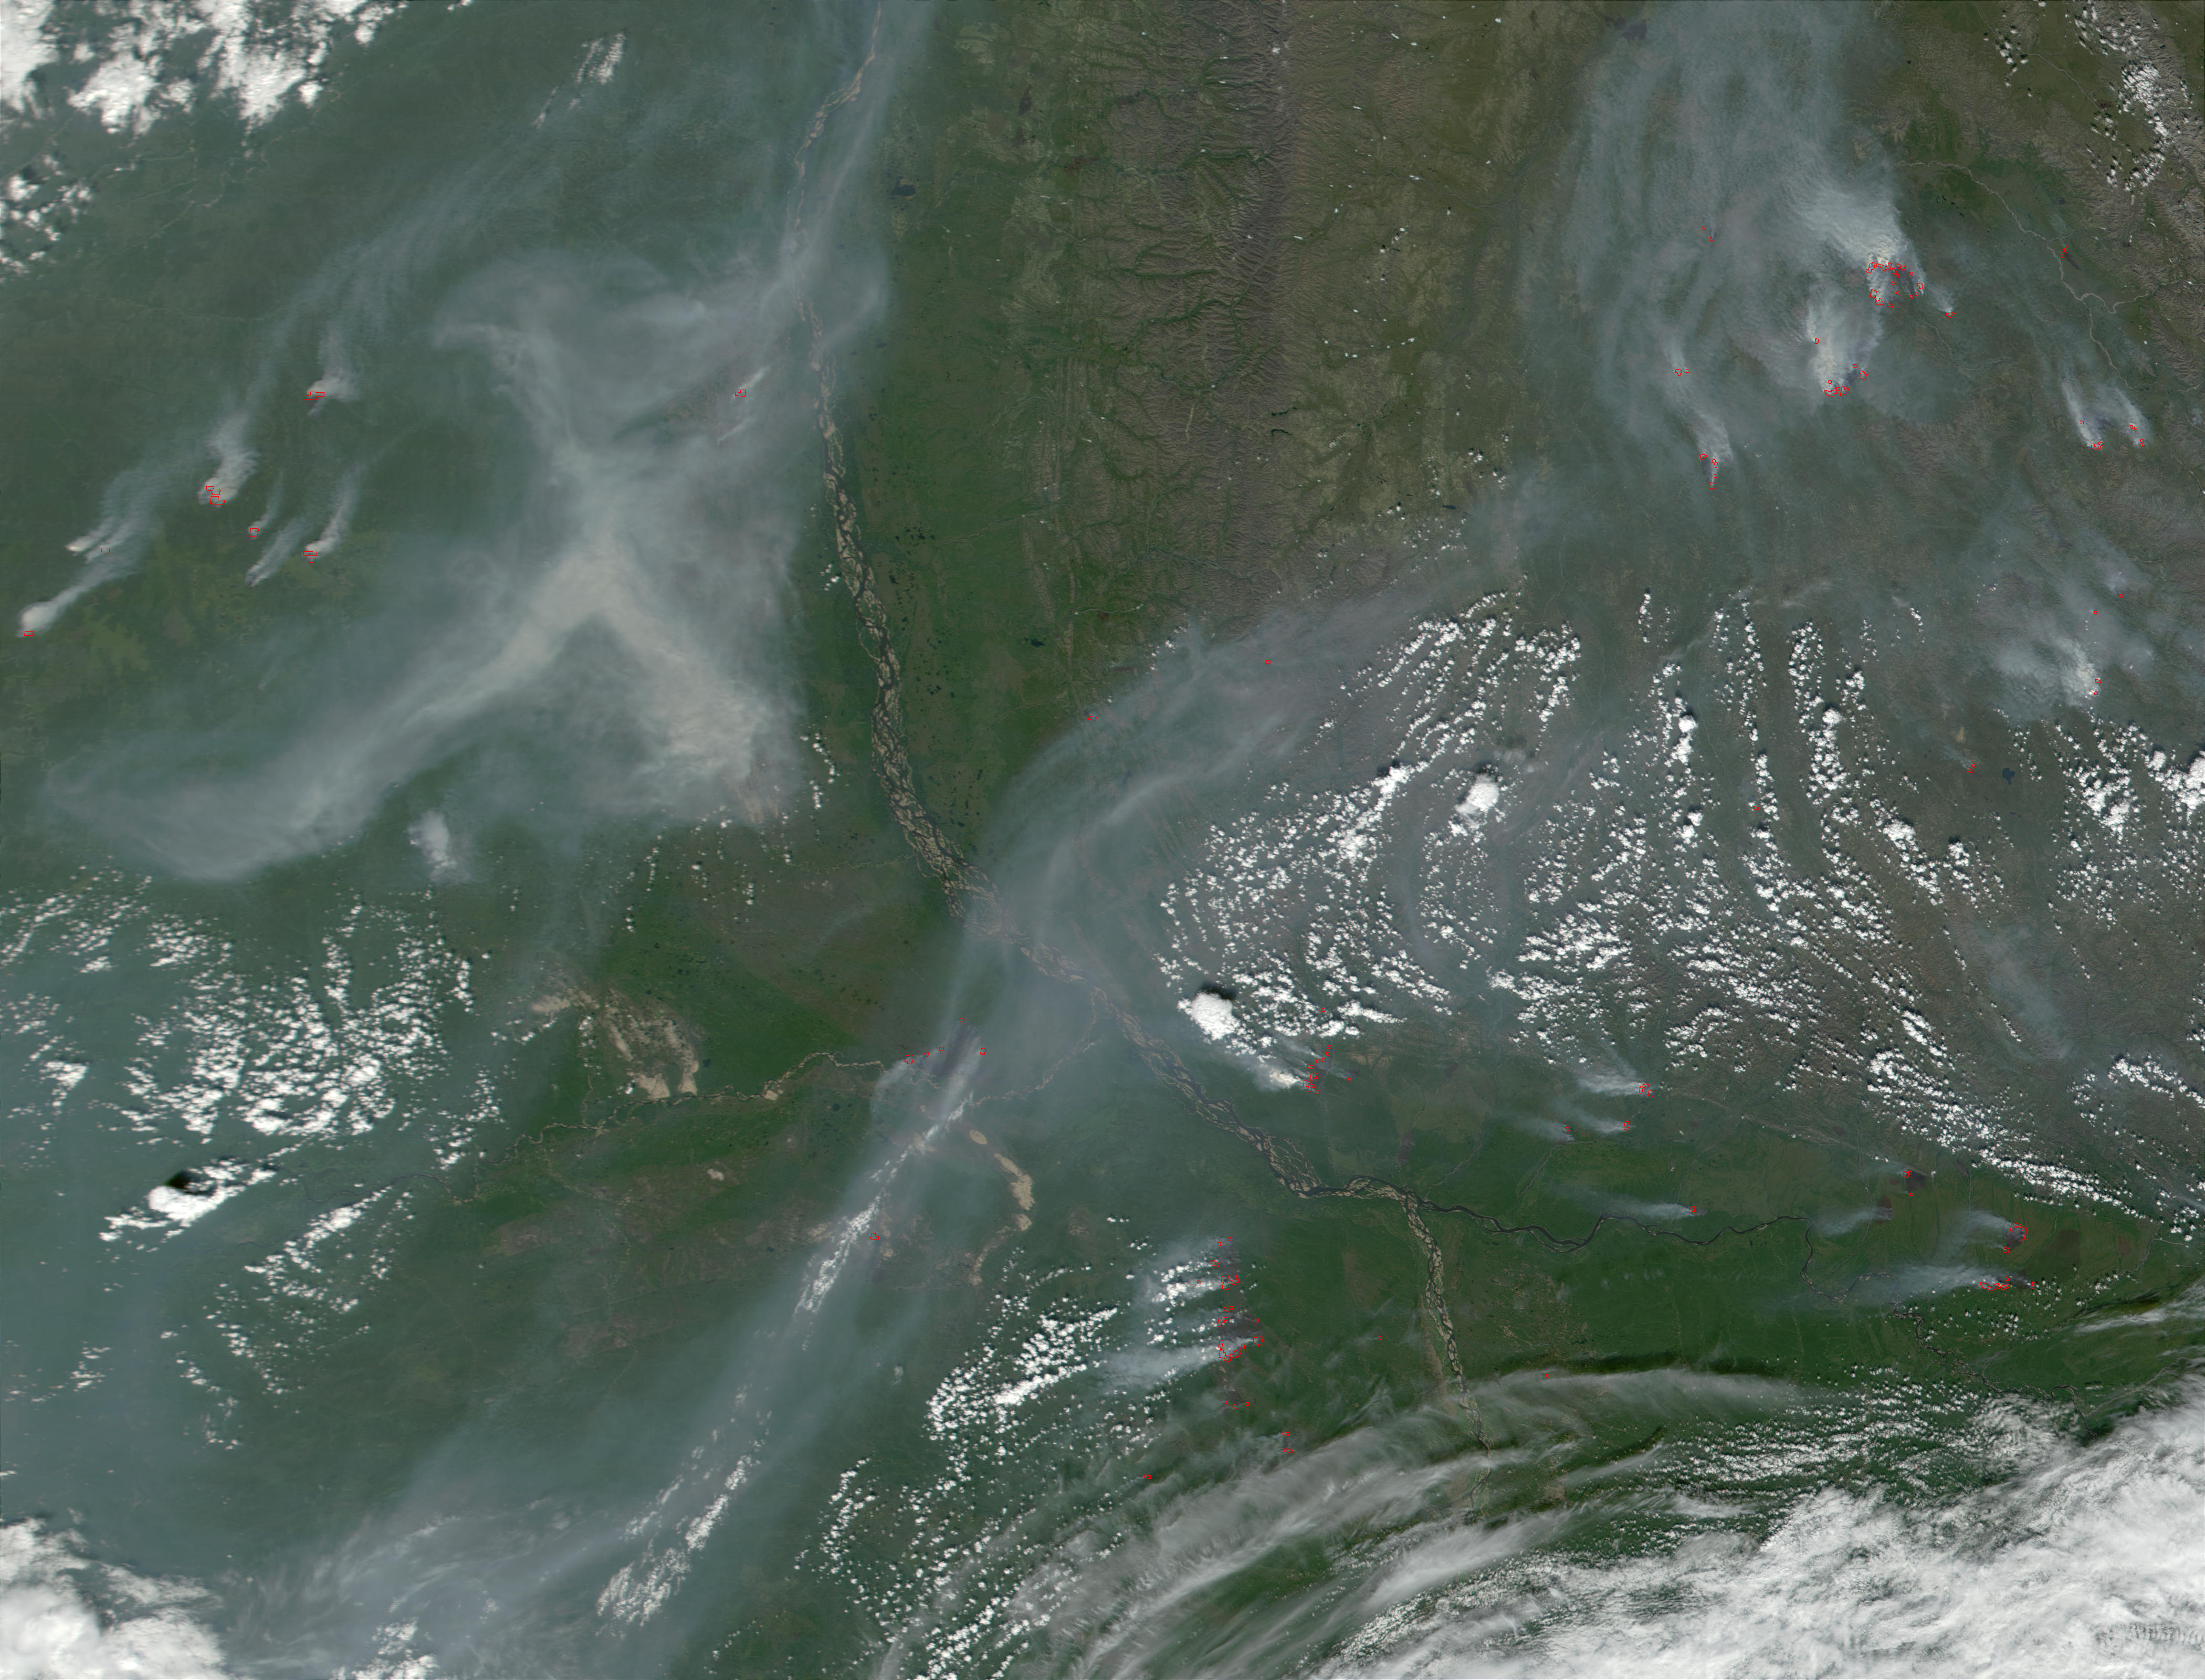 Large Outbreak of Fires near Yakutsk, Russia - related image preview